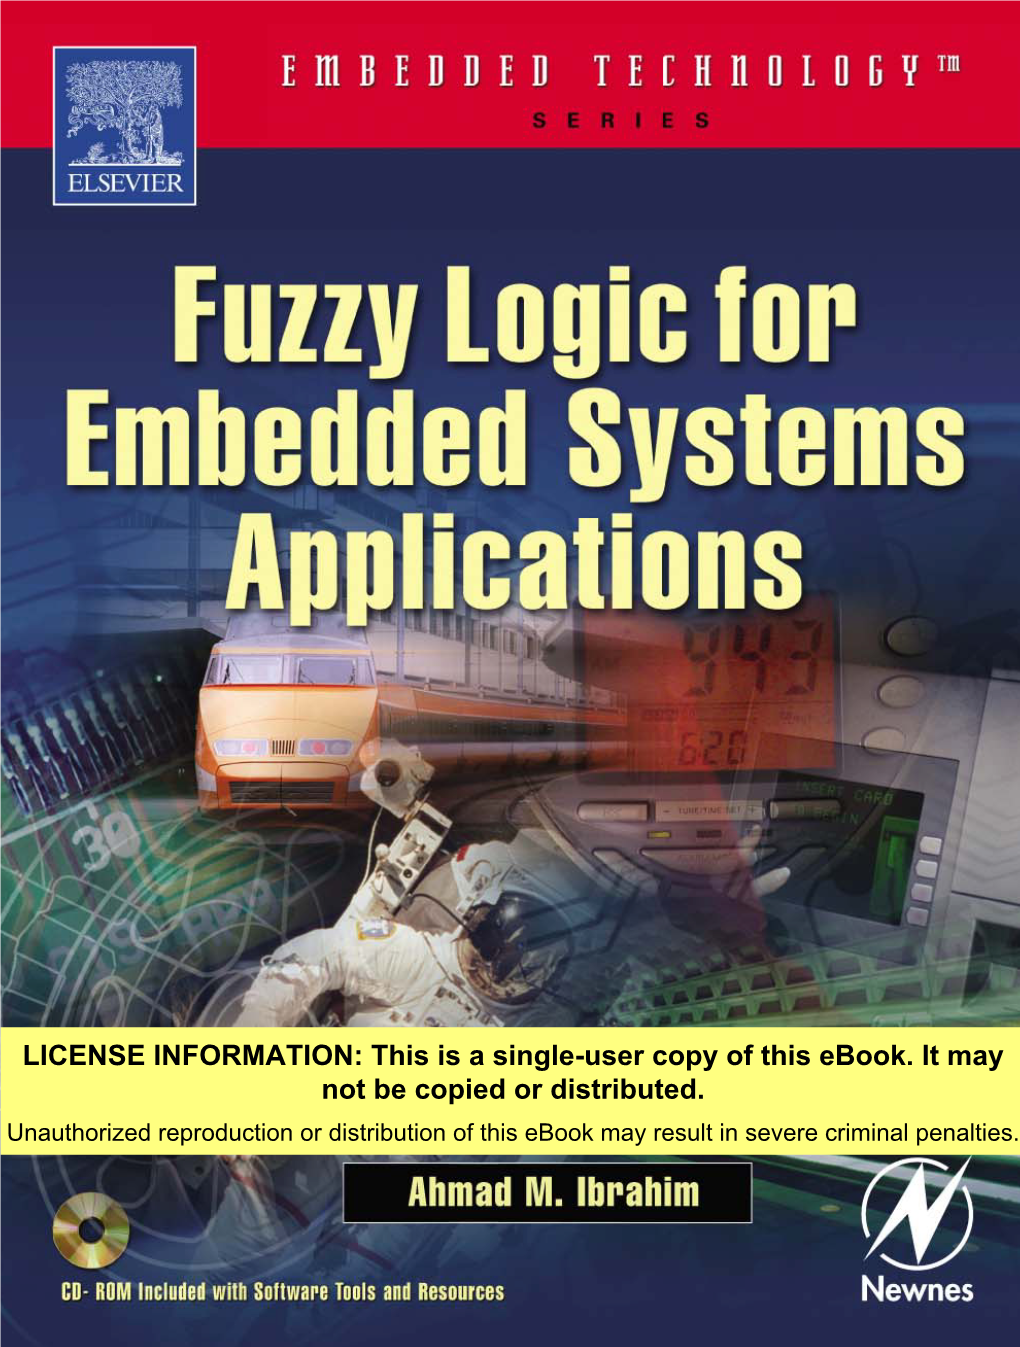 FUZZY LOGIC for Embedded Systems Applications FUZZY LOGIC for Embedded Systems Applications